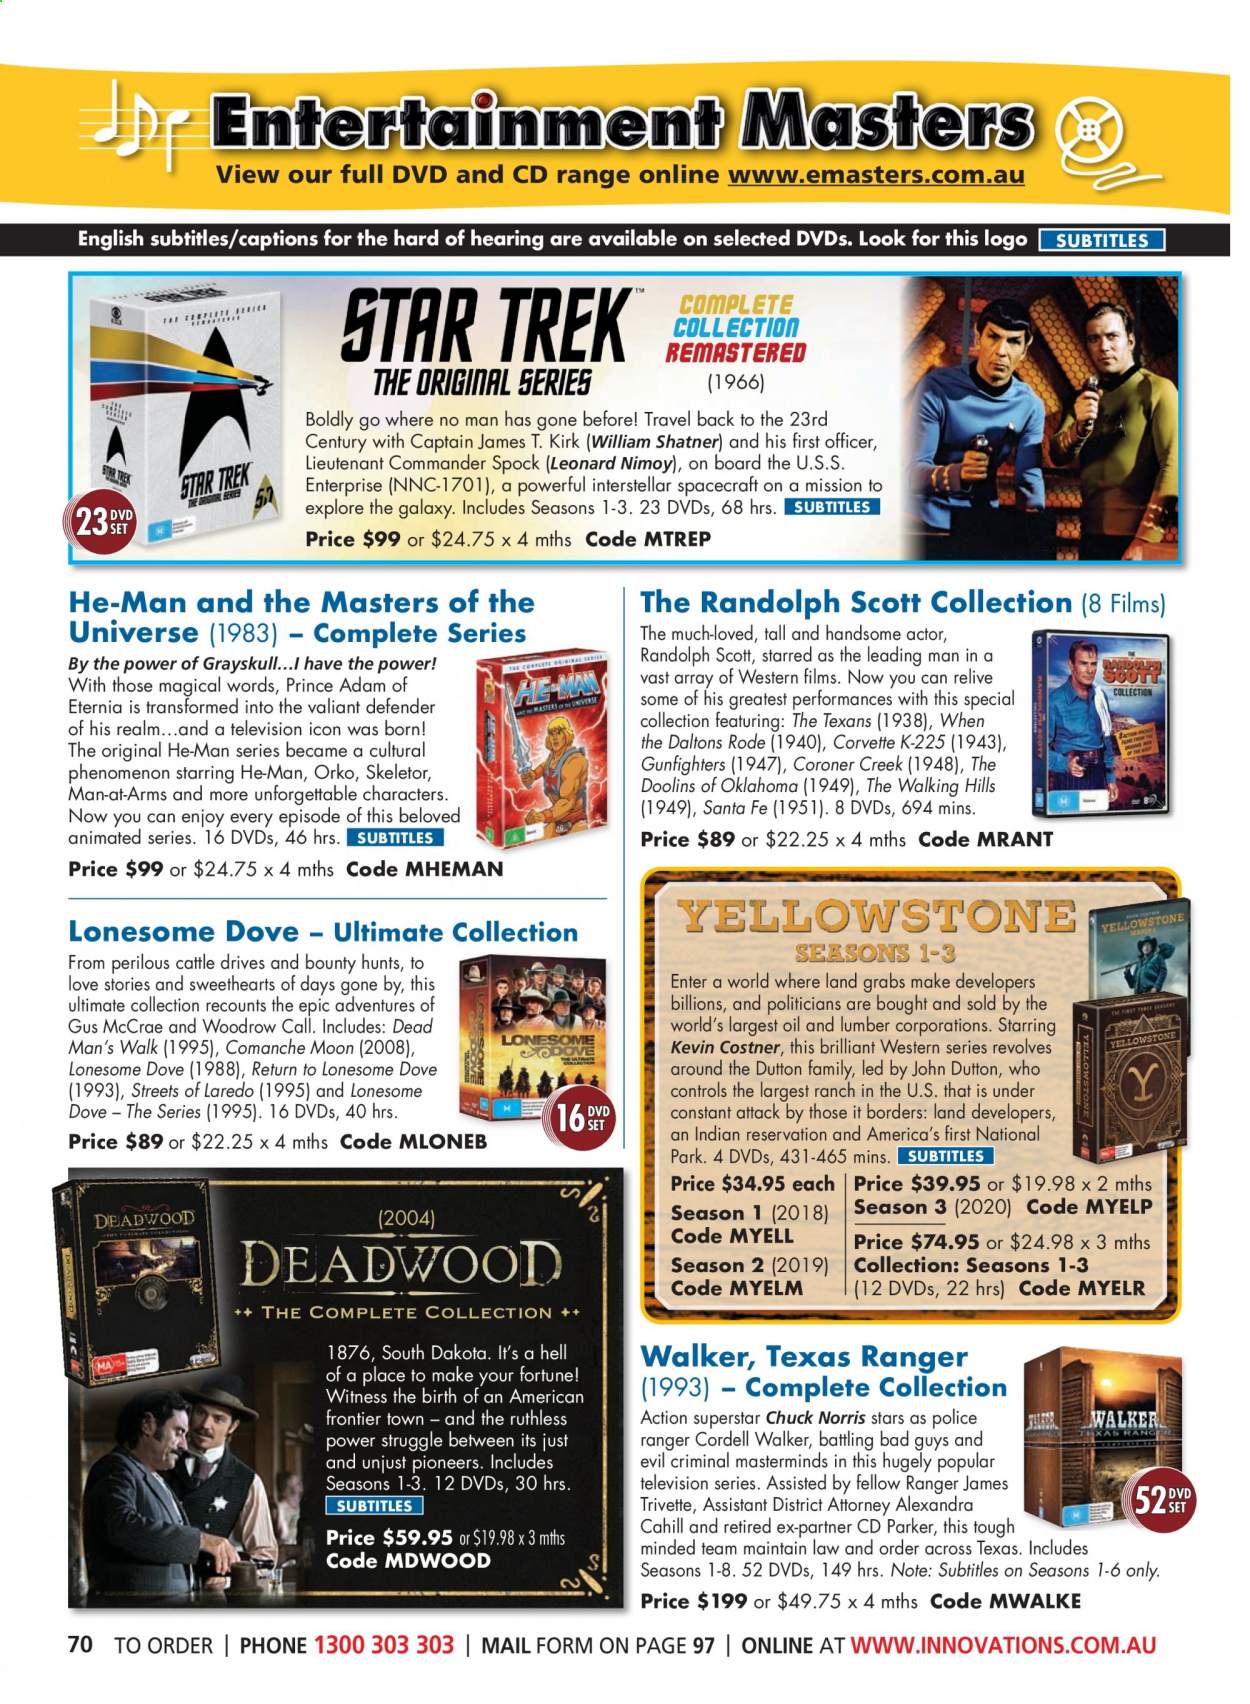 thumbnail - Innovations Catalogue - Sales products - Parker, DVD, He-Man, Hill's, rode. Page 70.